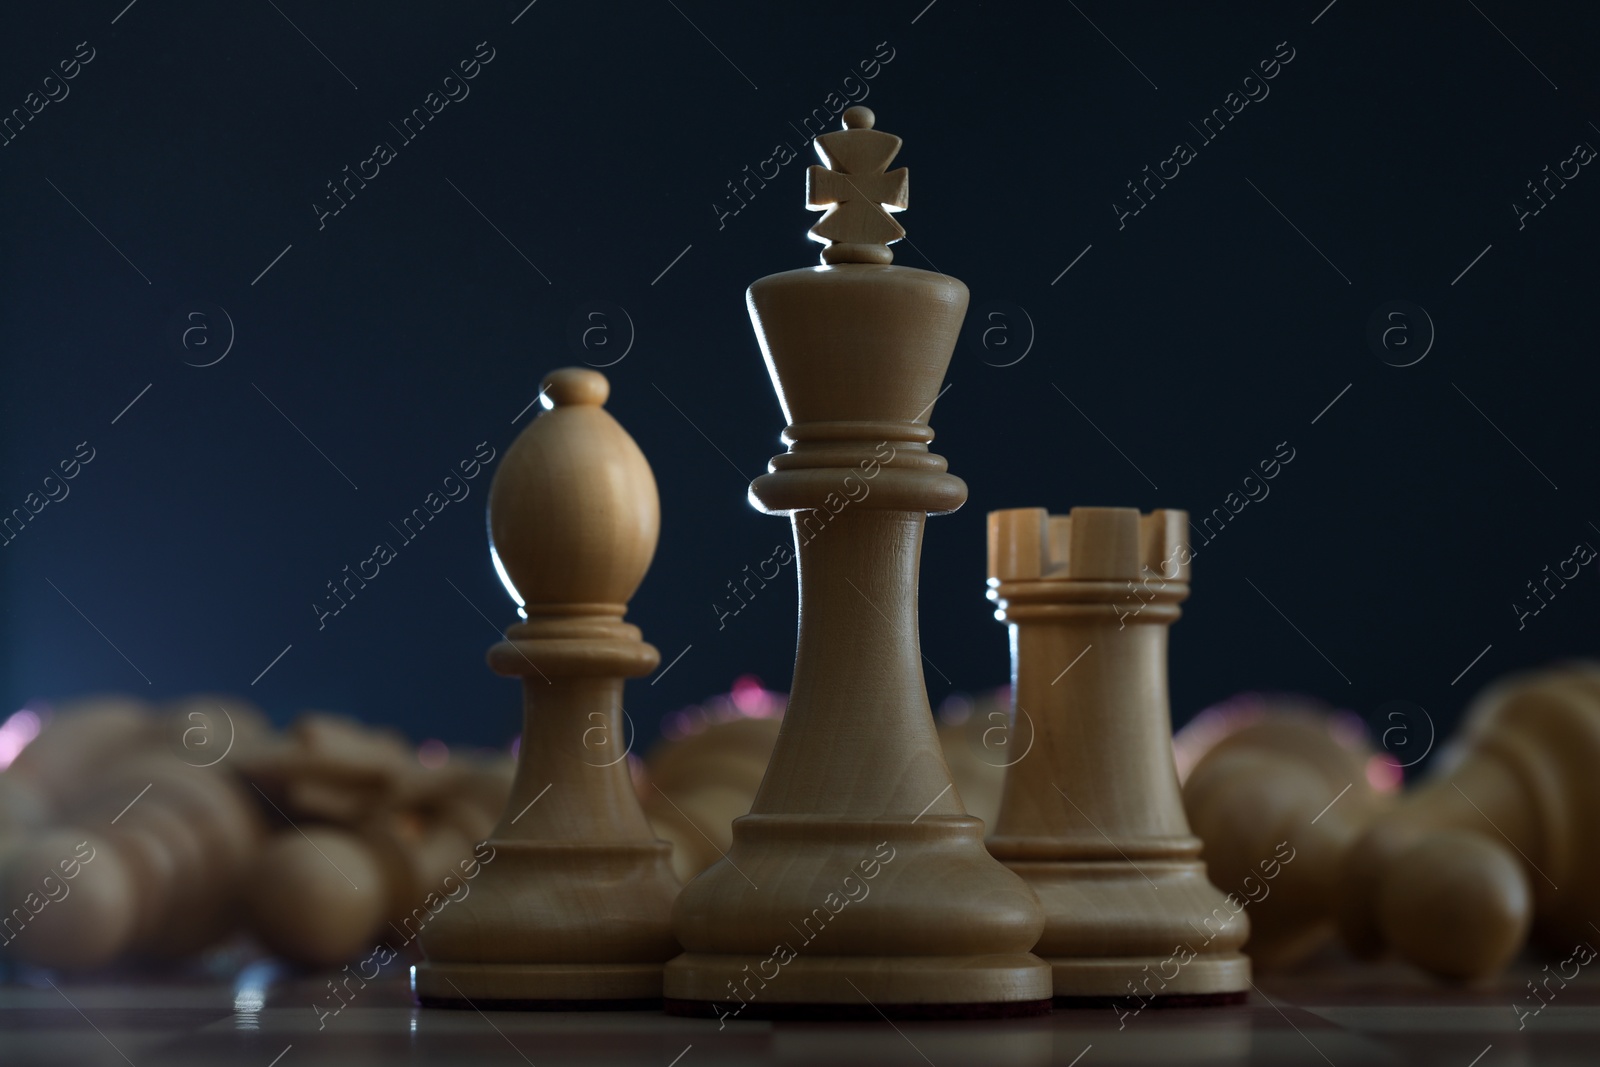 Photo of Wooden king, rook and bishop in front of fallen chess pieces on checkerboard against dark background, closeup